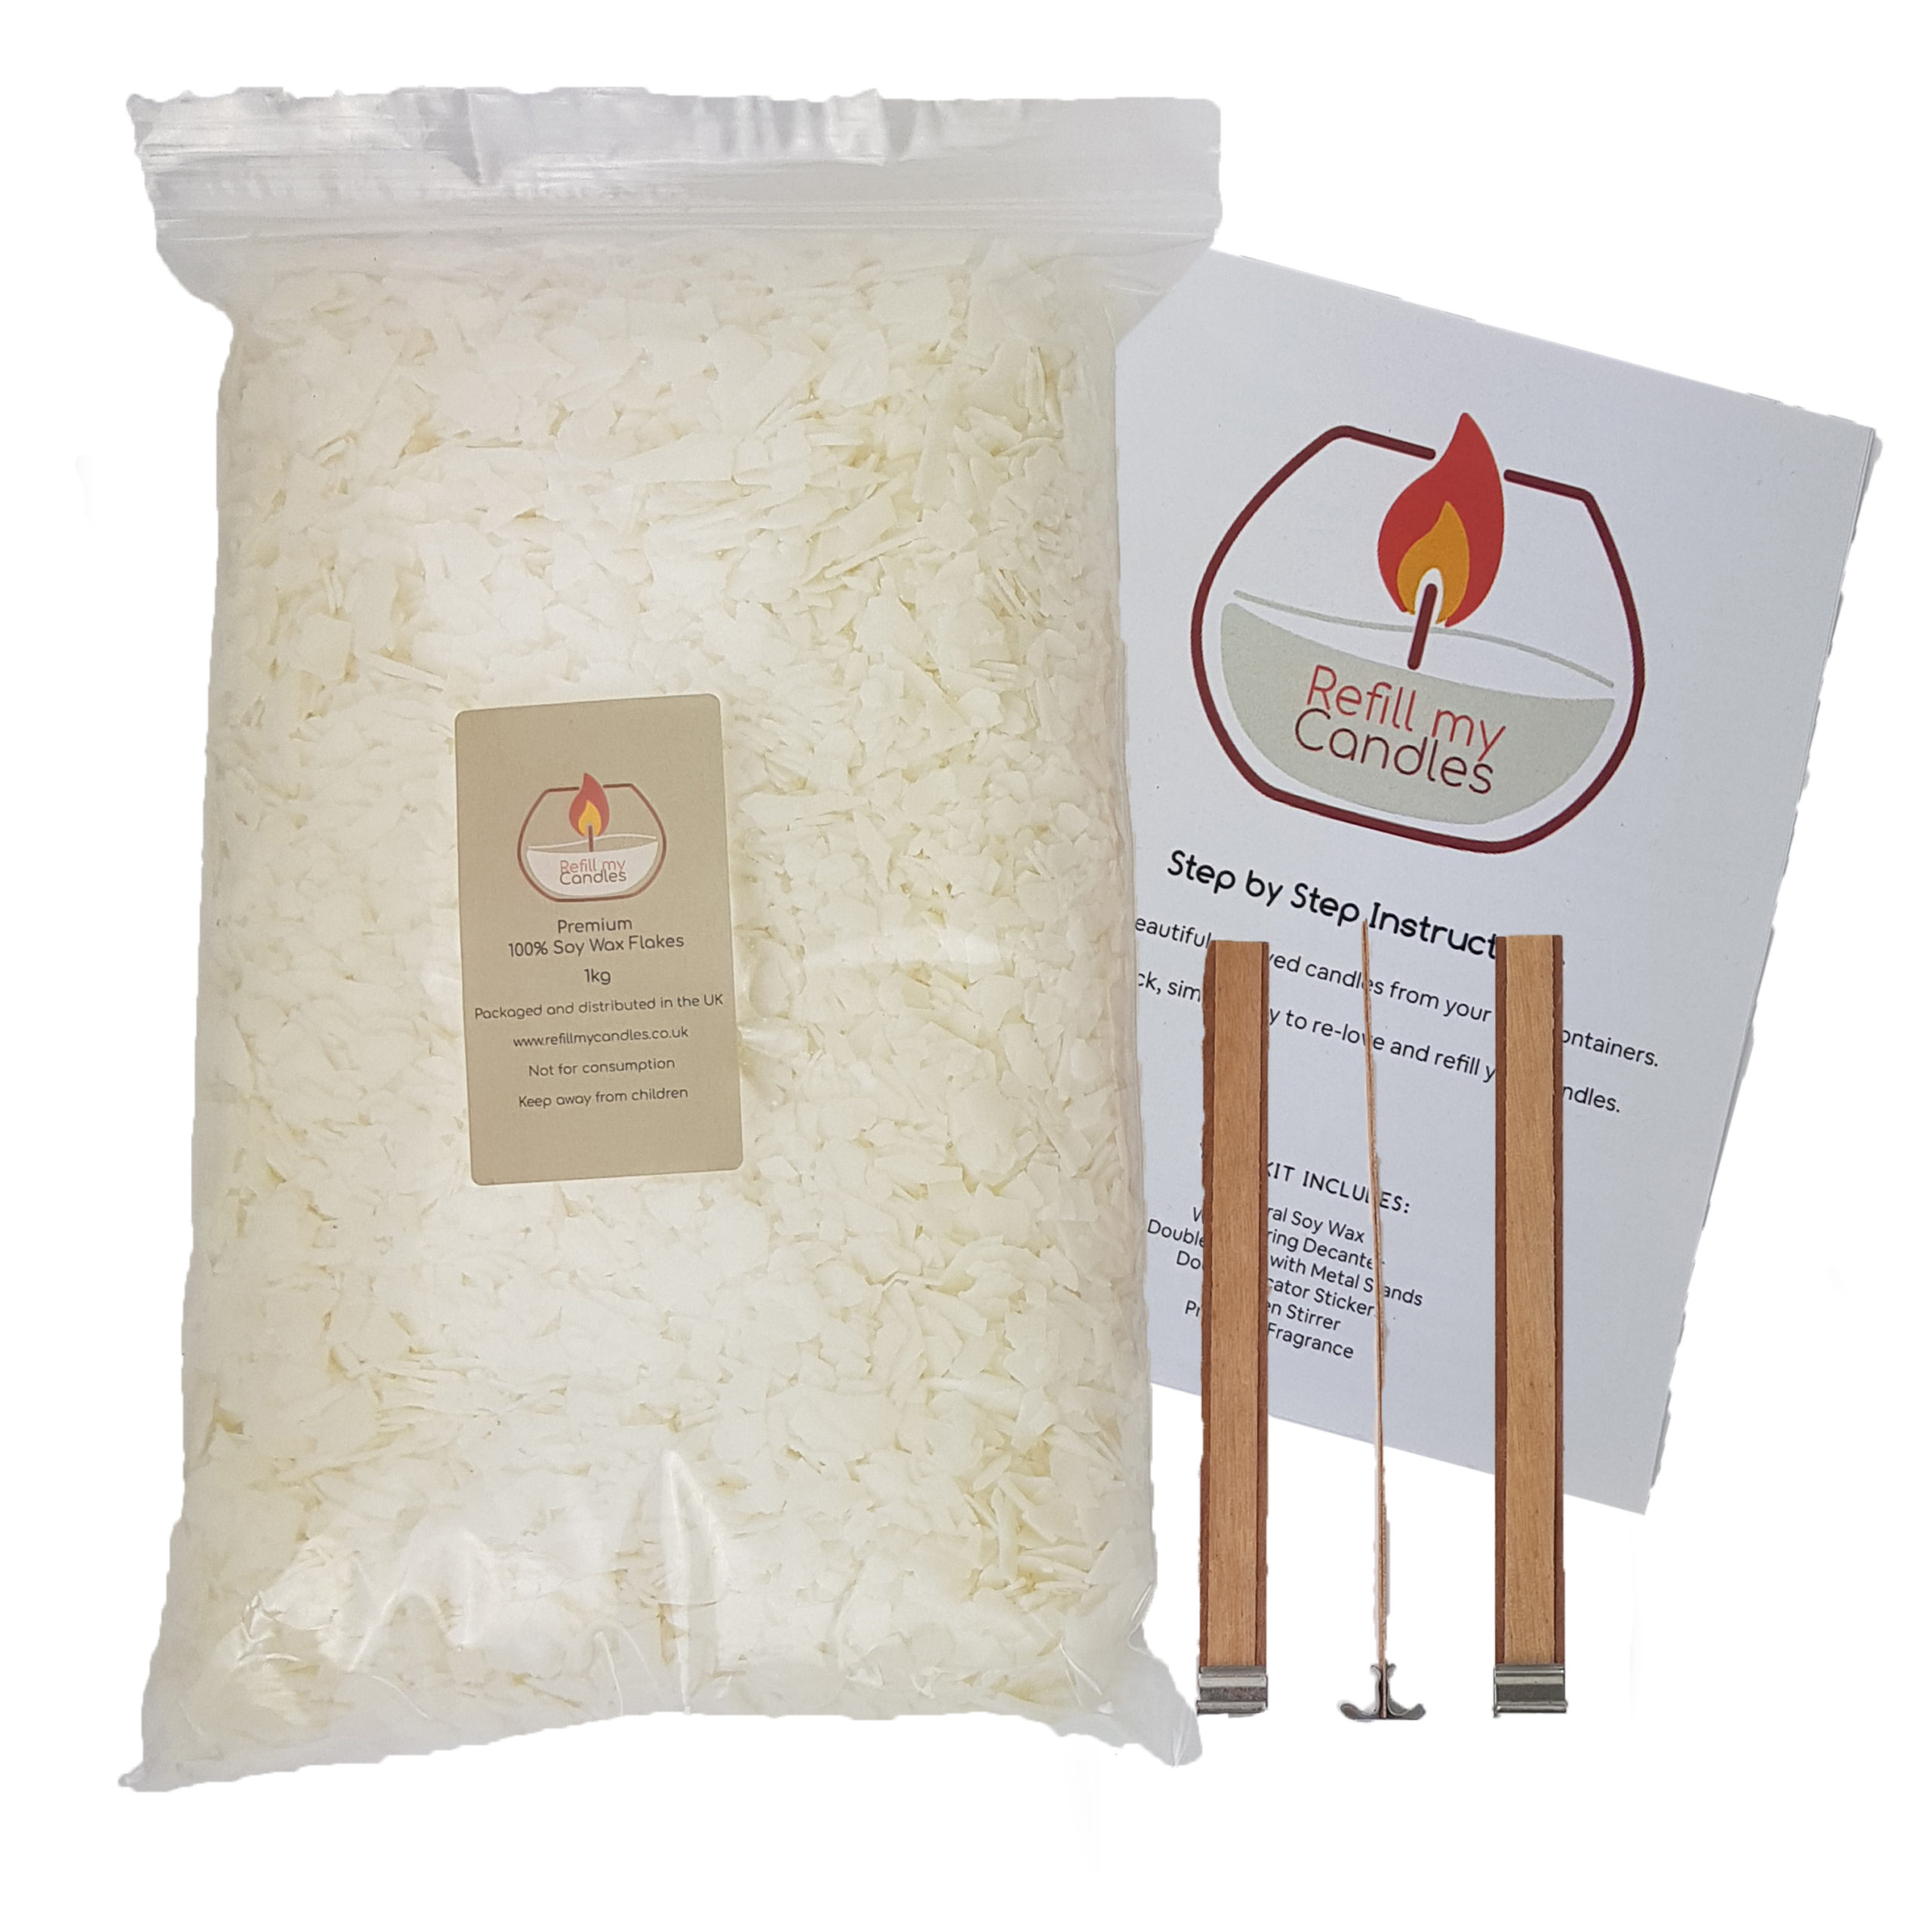 Top up candle kit – 1KG 100% Natural Soy Wax & 3 x 13mm x15cm Tall Double Woodwicks pack & Instructions